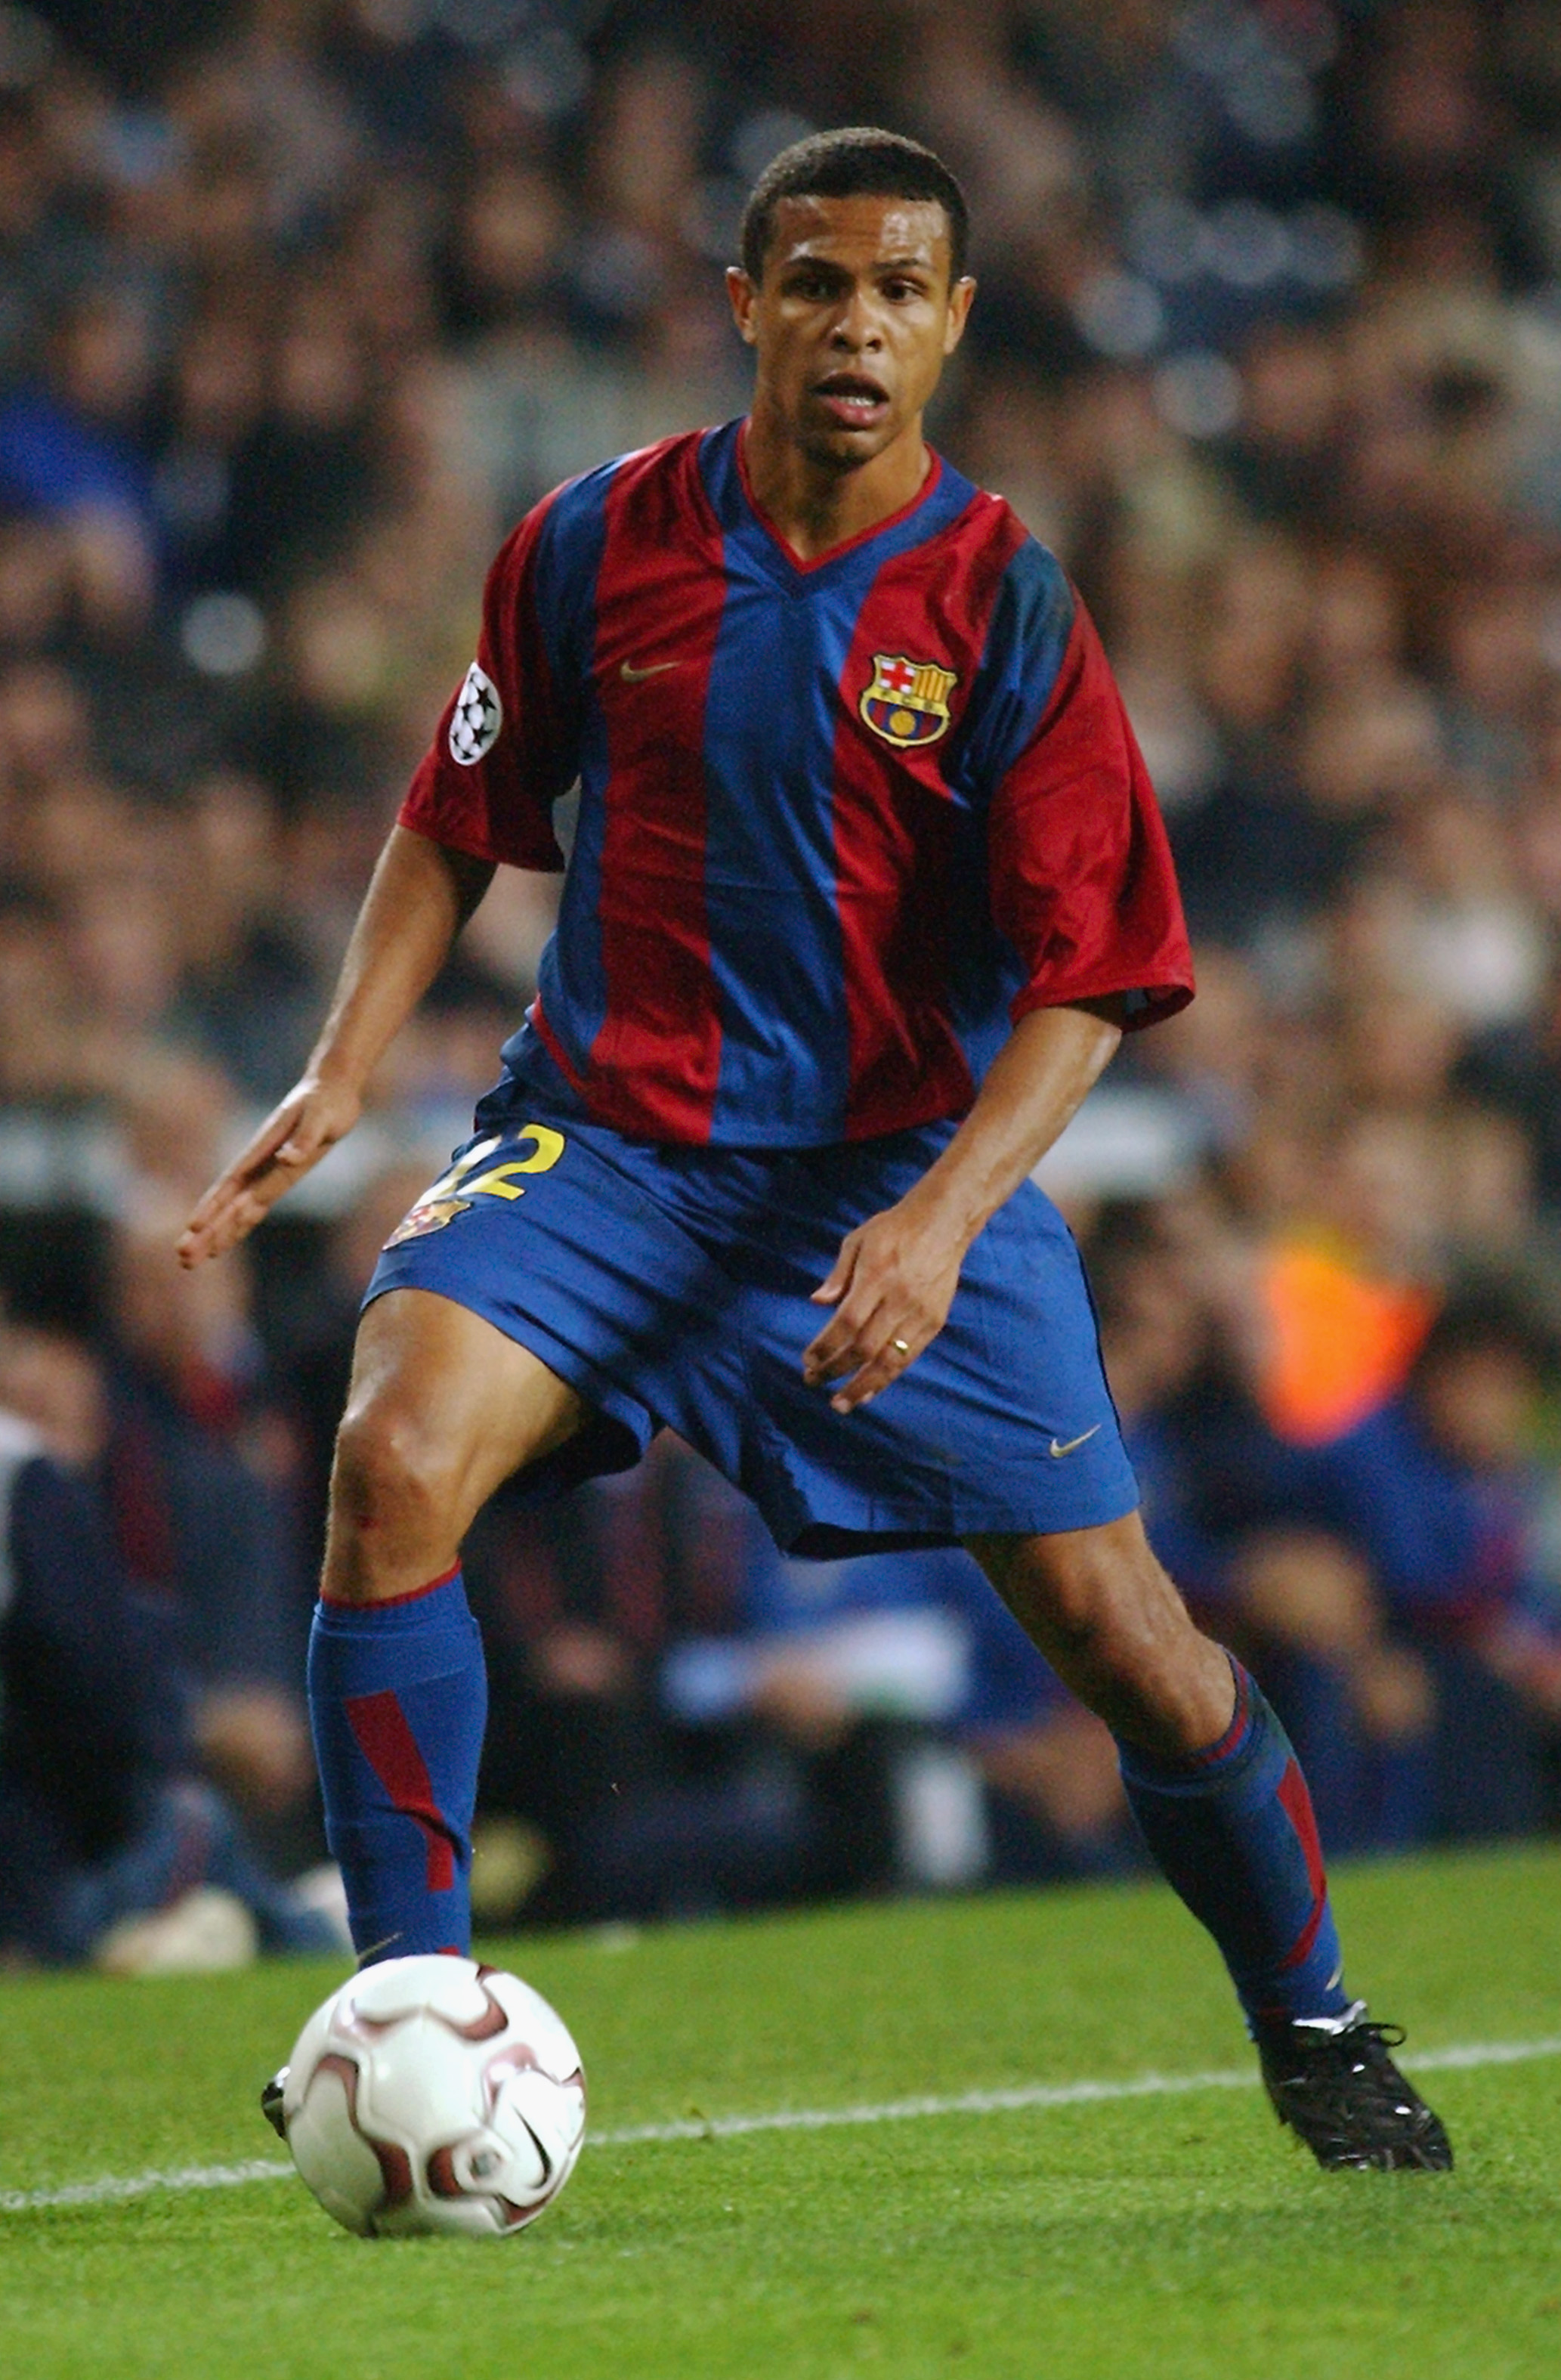 BARCELONA - NOVEMBER 13 :   Geovanni of Barcelona in action during the Champions League Group H match between FC Barcelona and Galatasaray SK at the Nou Camp stadiun in Barcelona, Spain on 13 November, 2002. (Photo by Ross Kinnaird/Getty Images) Barcelona